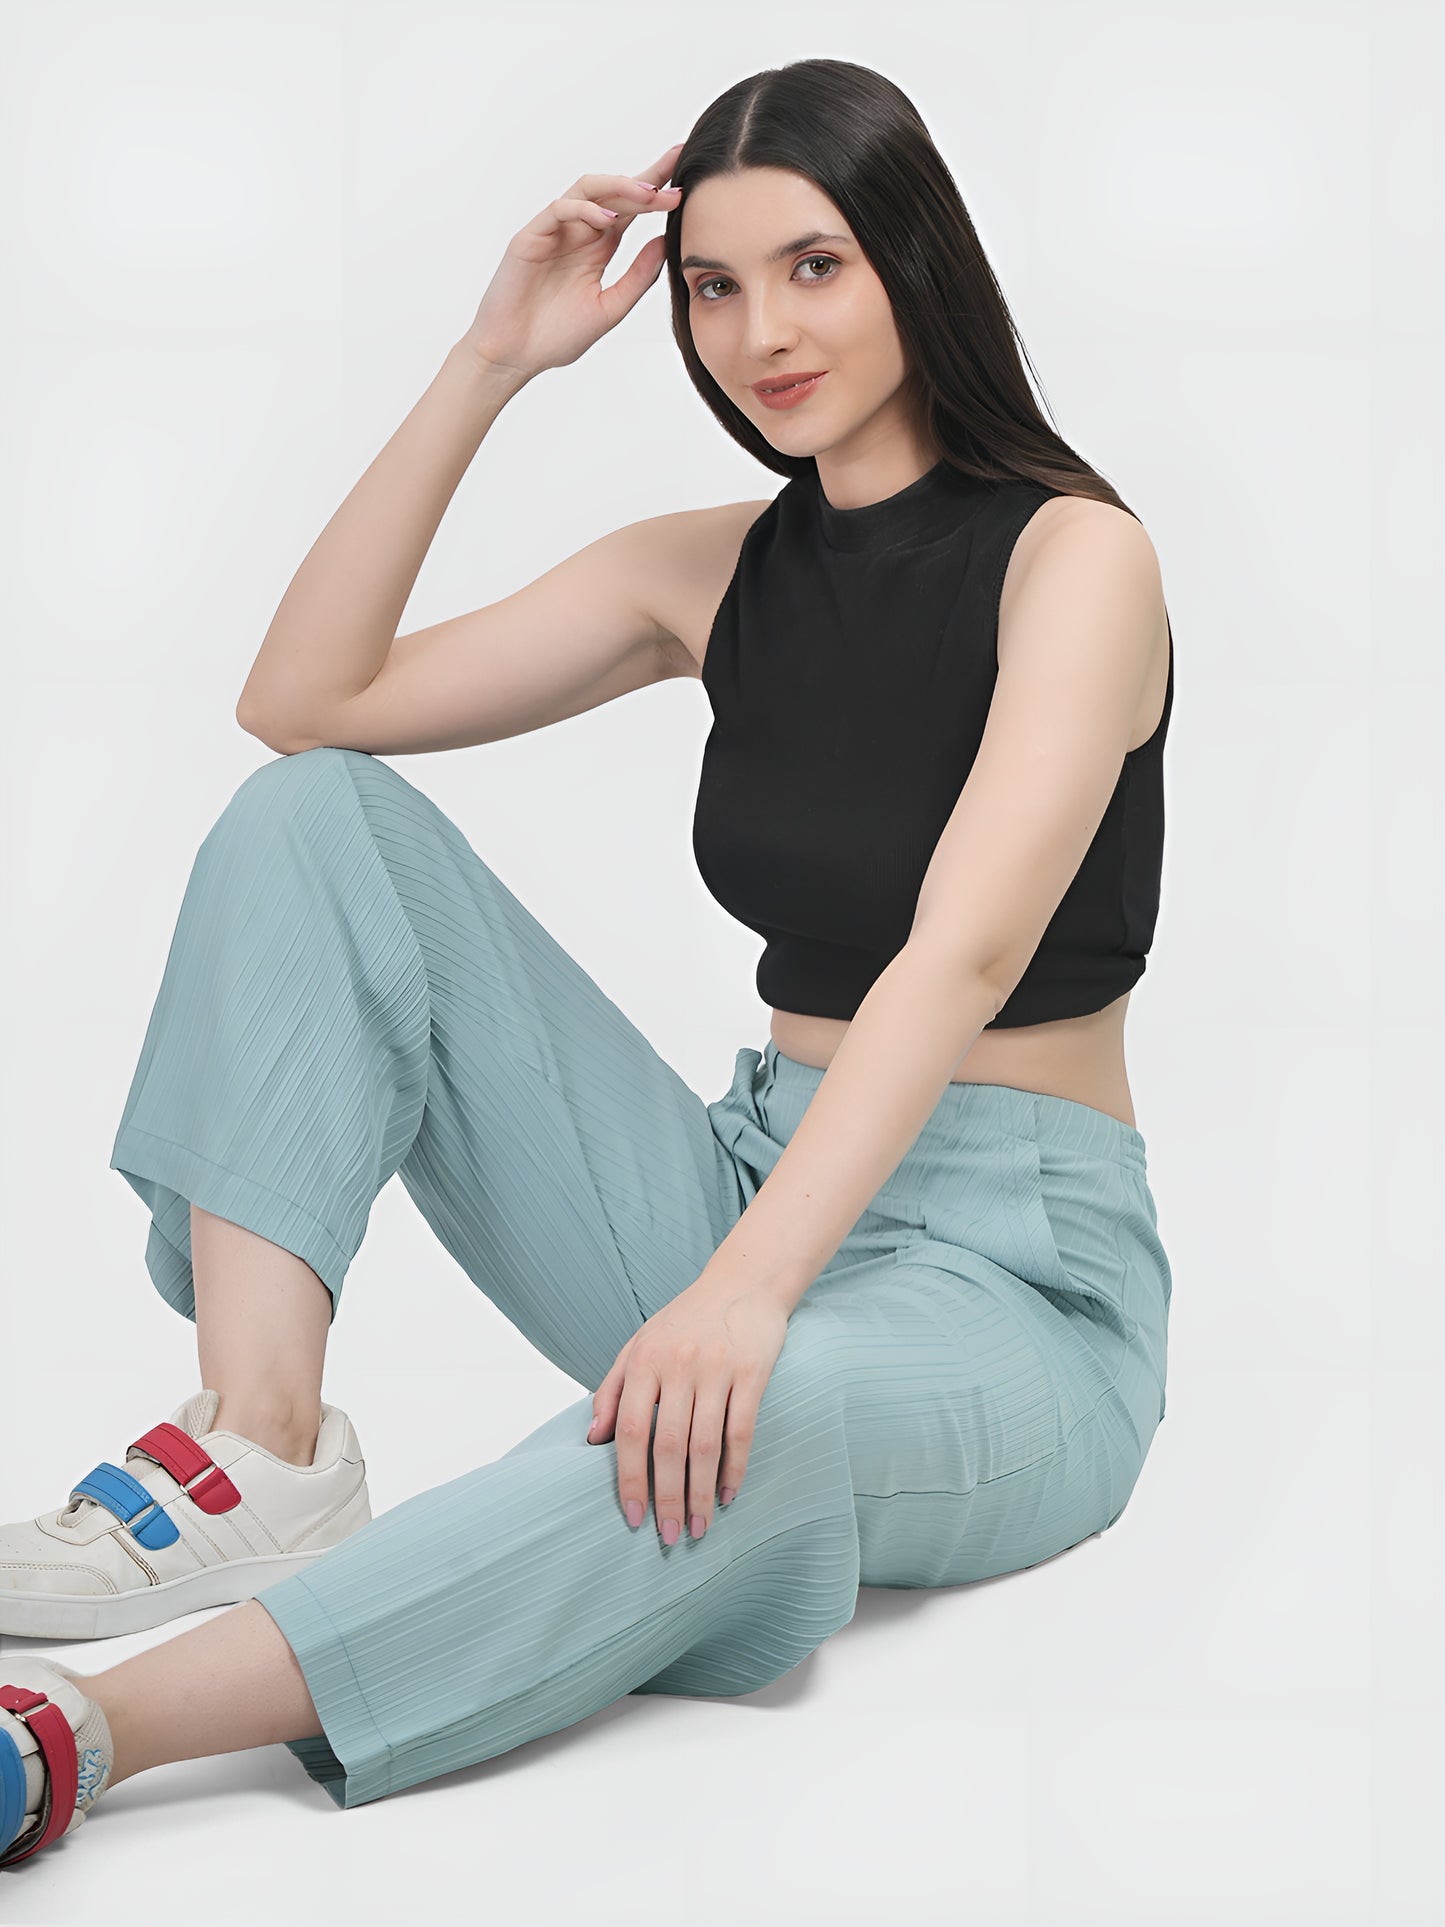 Mint  Colour | Women Formal Trousers Regular Fit Being Flawless